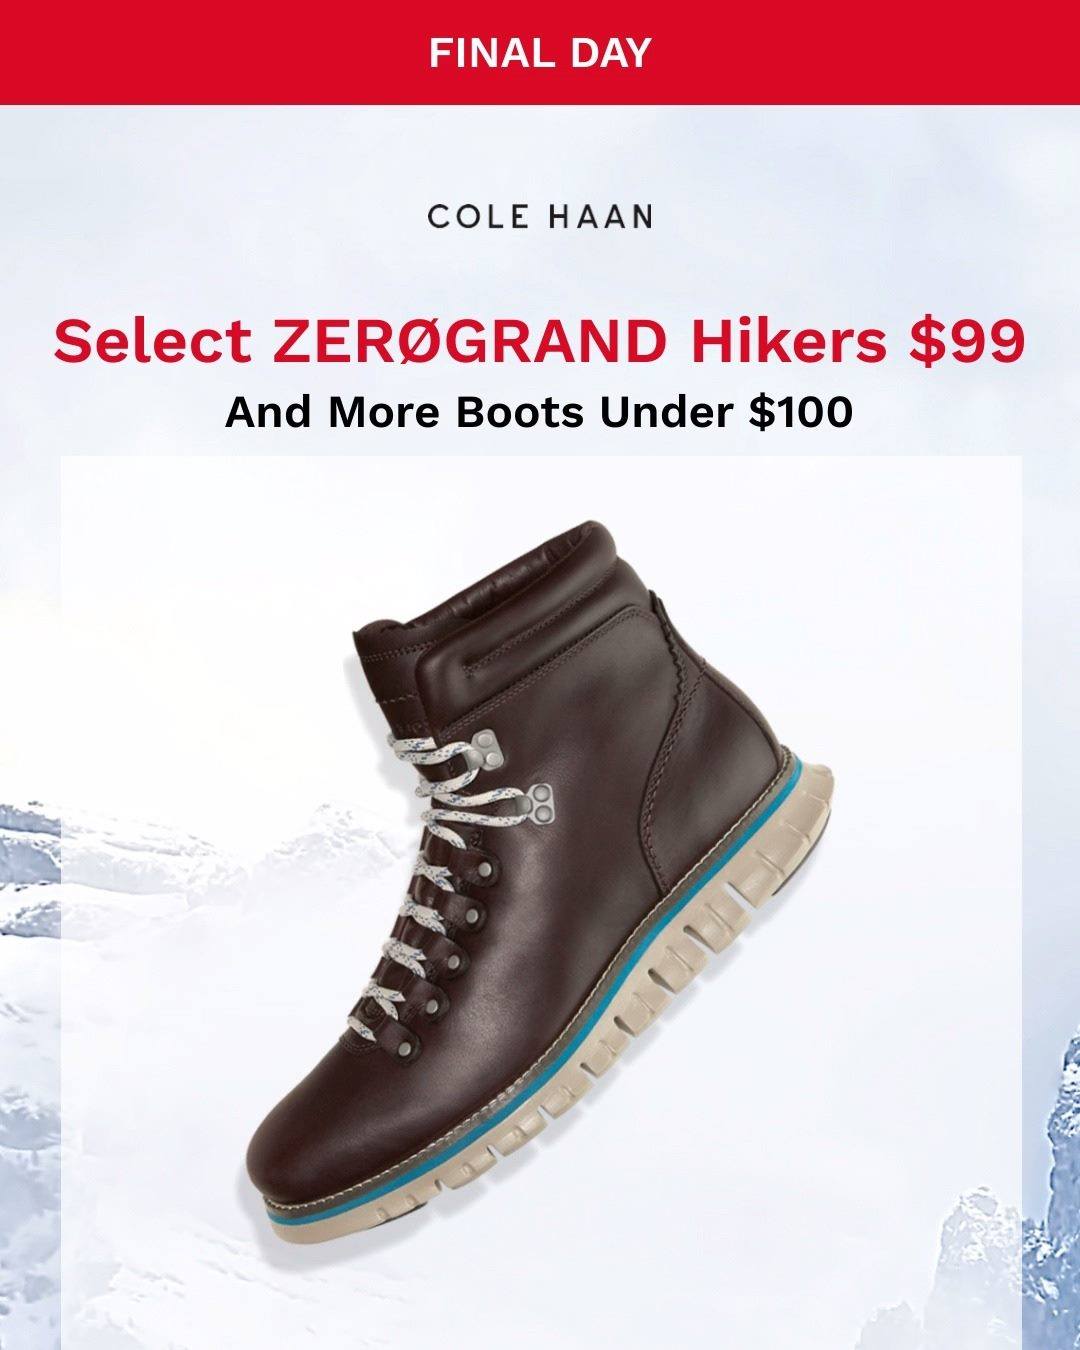 FINAL DAY: Select ZERØGRAND hikers $99 and more boots under $100. 